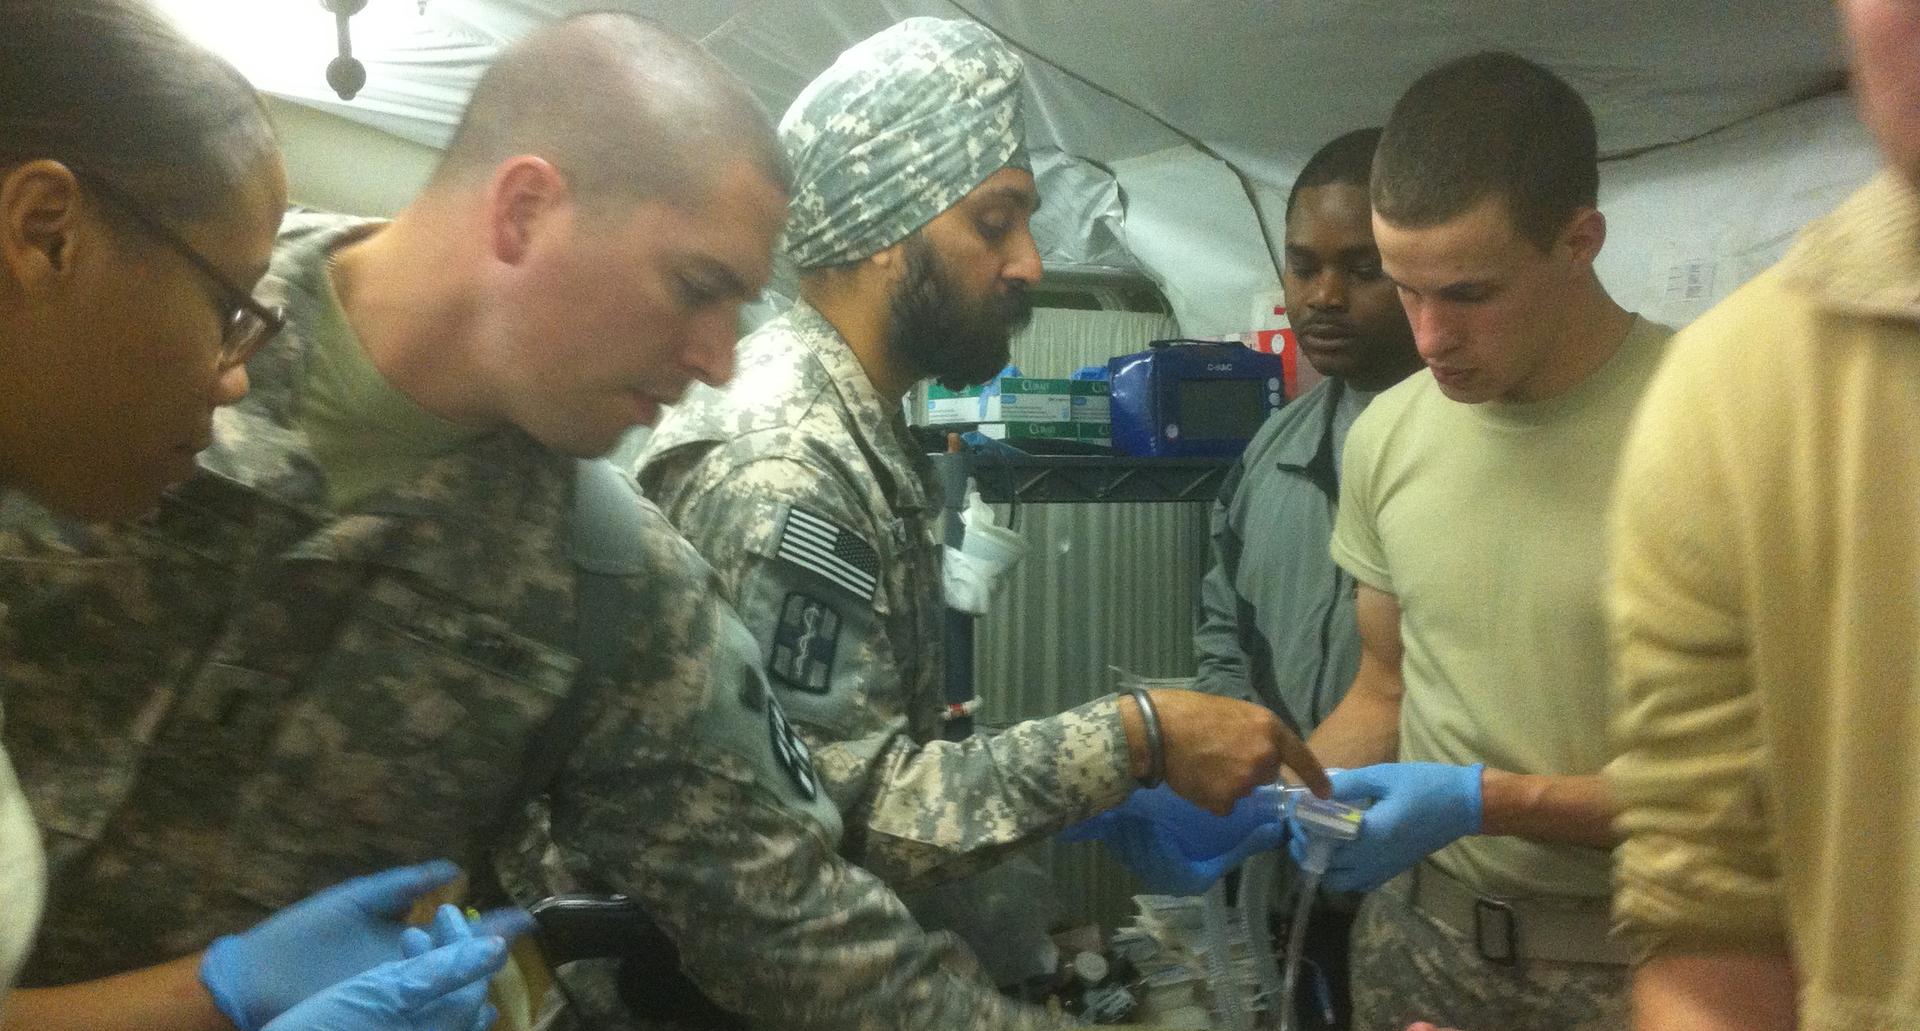 In January 2011, Kamal Kalsi served in Afghanistan as Officer-in-Chief of a tented Emergency Room in Helmand province.